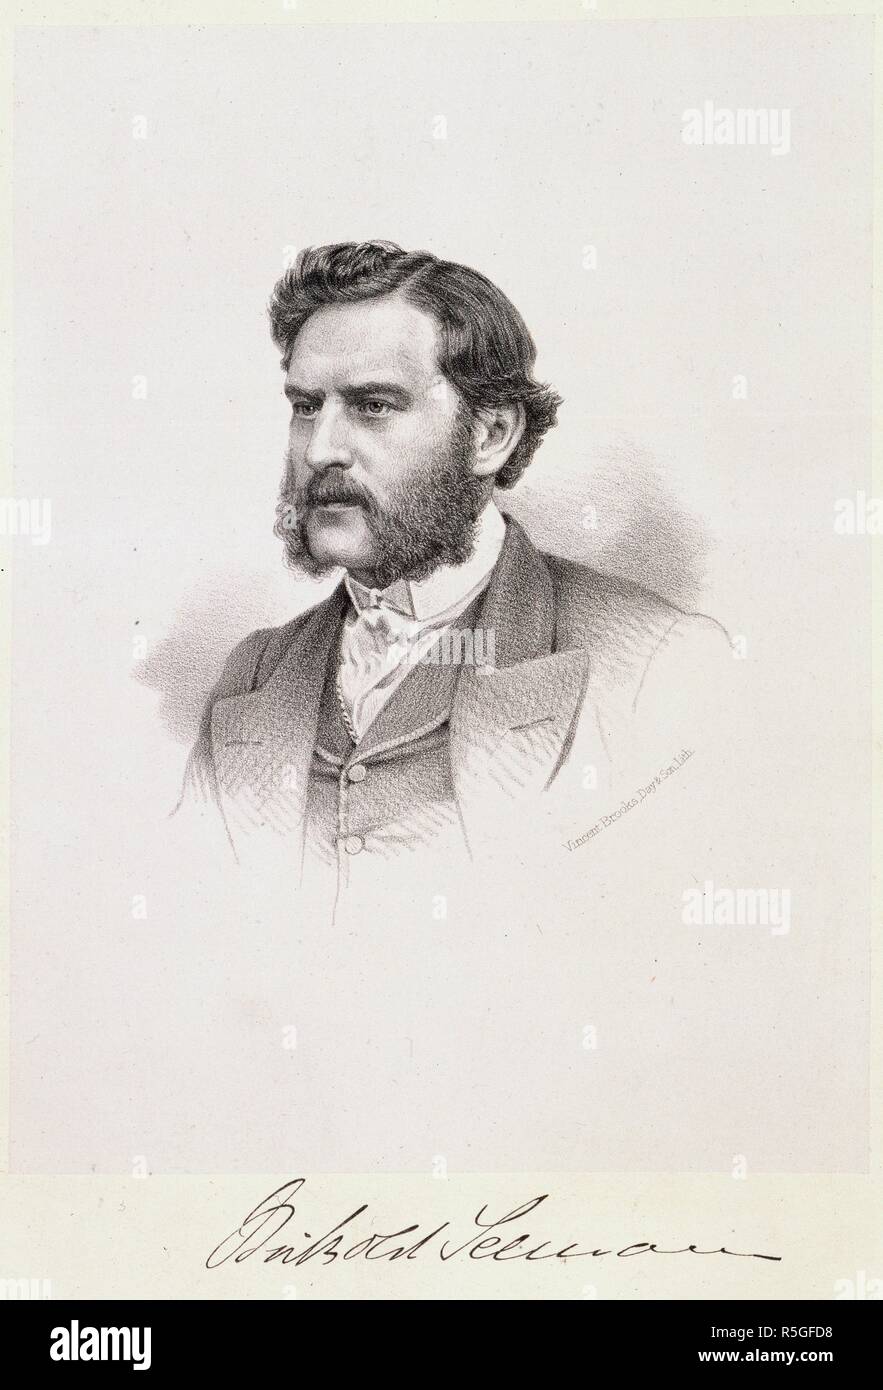 Carl Berthold Seemann.  Portrait of the author. Flora Vitiensis: a description of the plants of the Viti or Fiji Islands, with an account of their history, uses, and properties. London, 1865 - 1873. Source: 7033.l.4, opposite XXXI. Author: Seemann, Berthold Carl. Fitch, Walter. Stock Photo